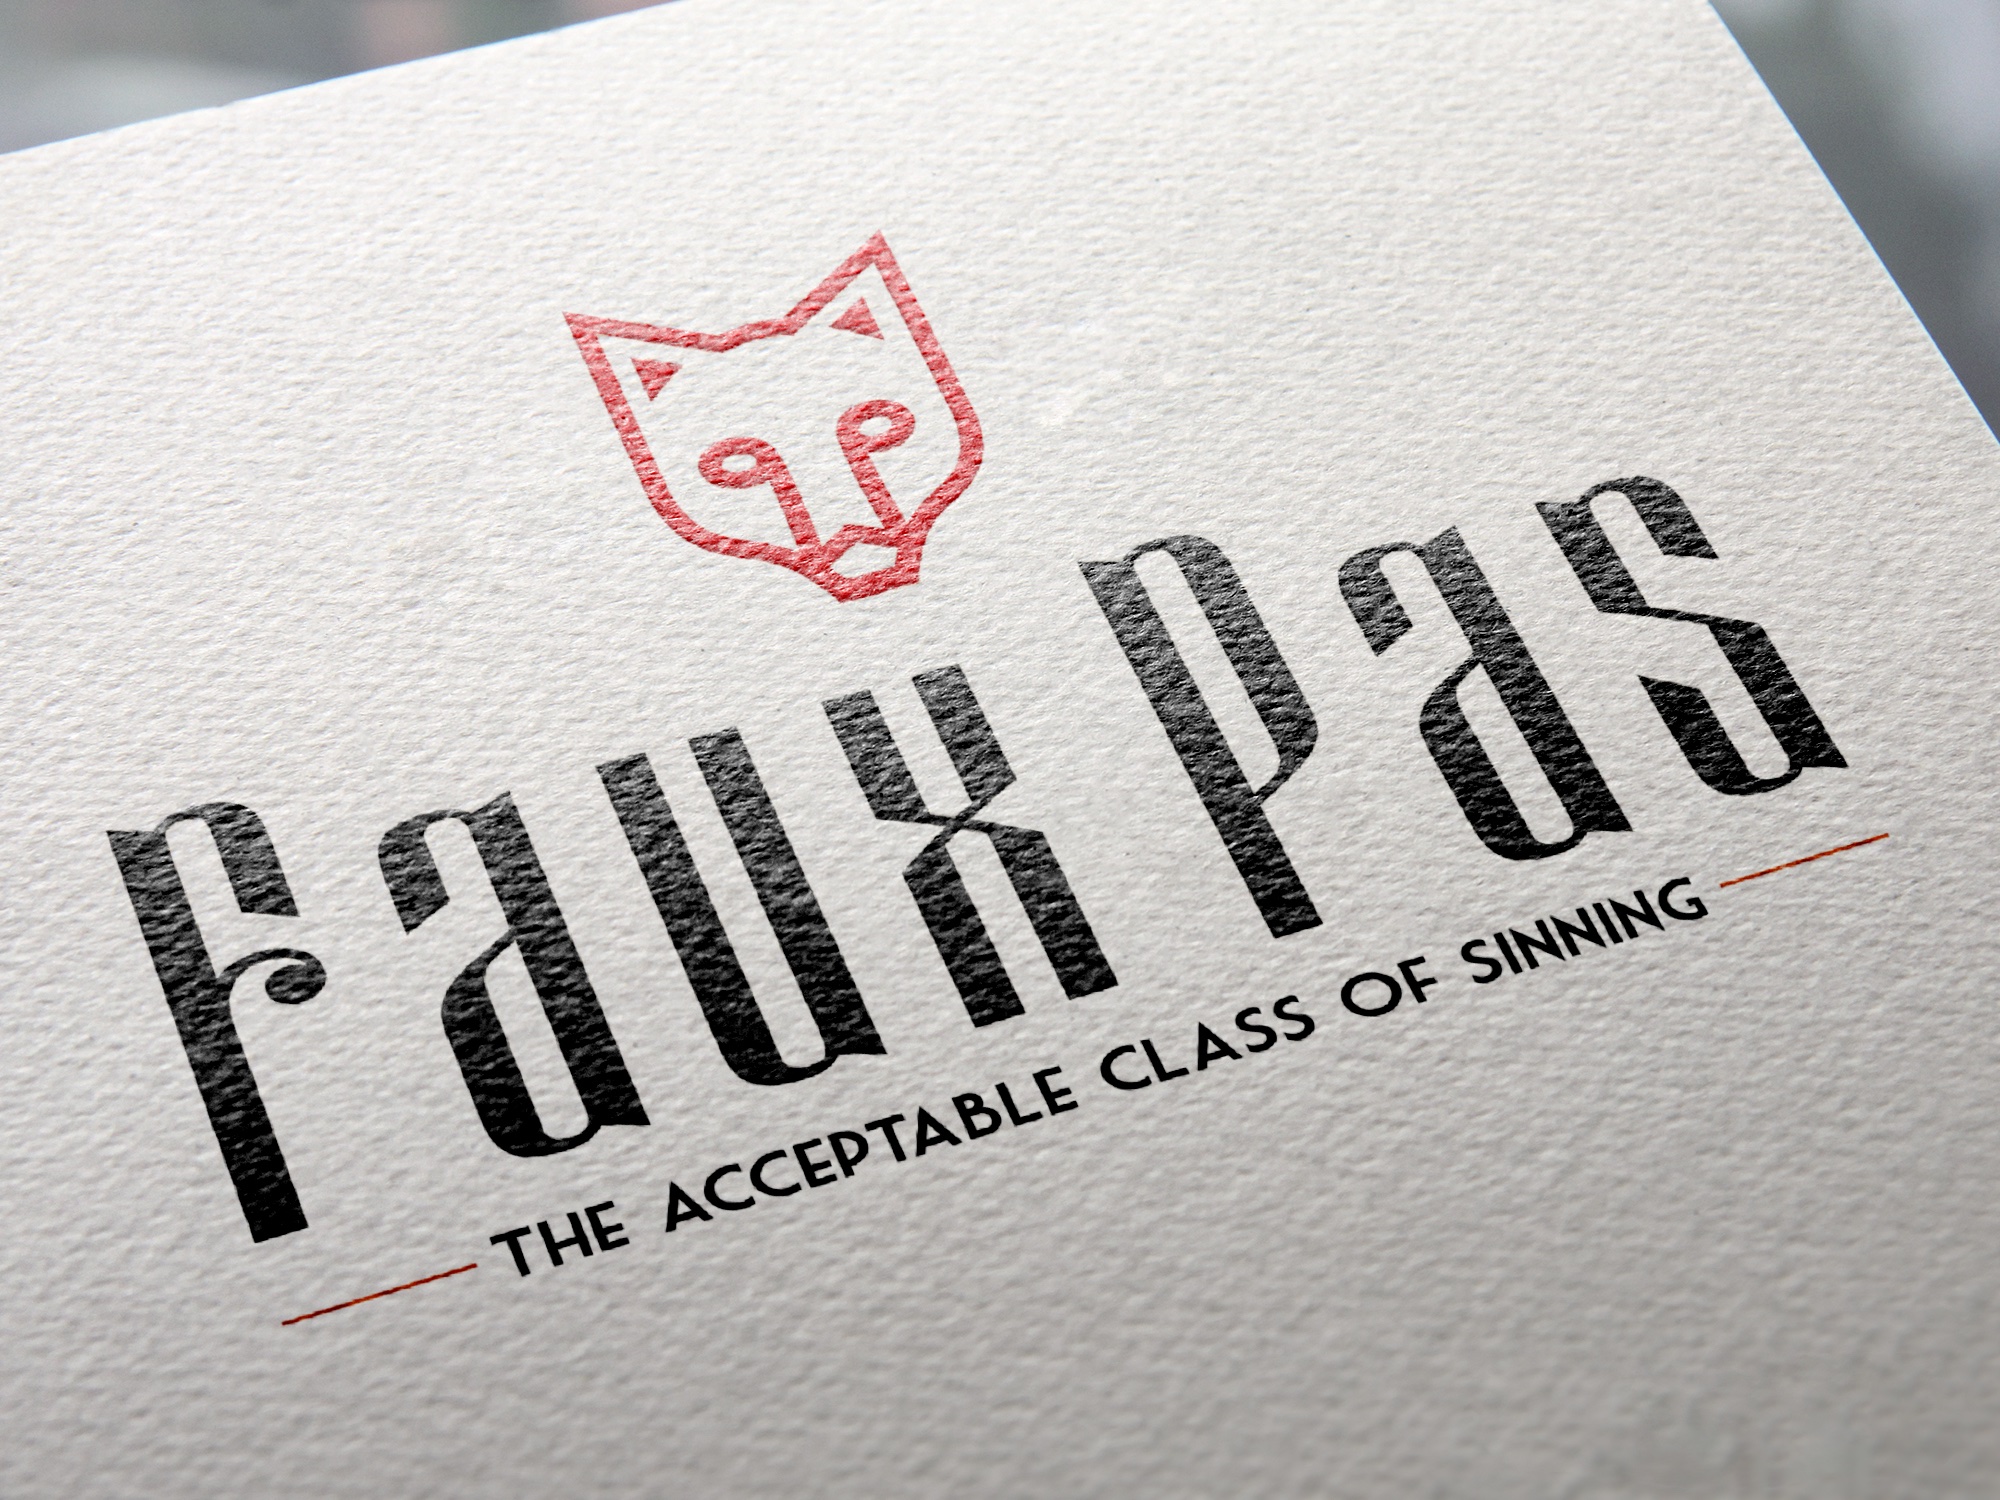 Faux Pas: The Acceptable Class of Sinning #3 (Gossip)